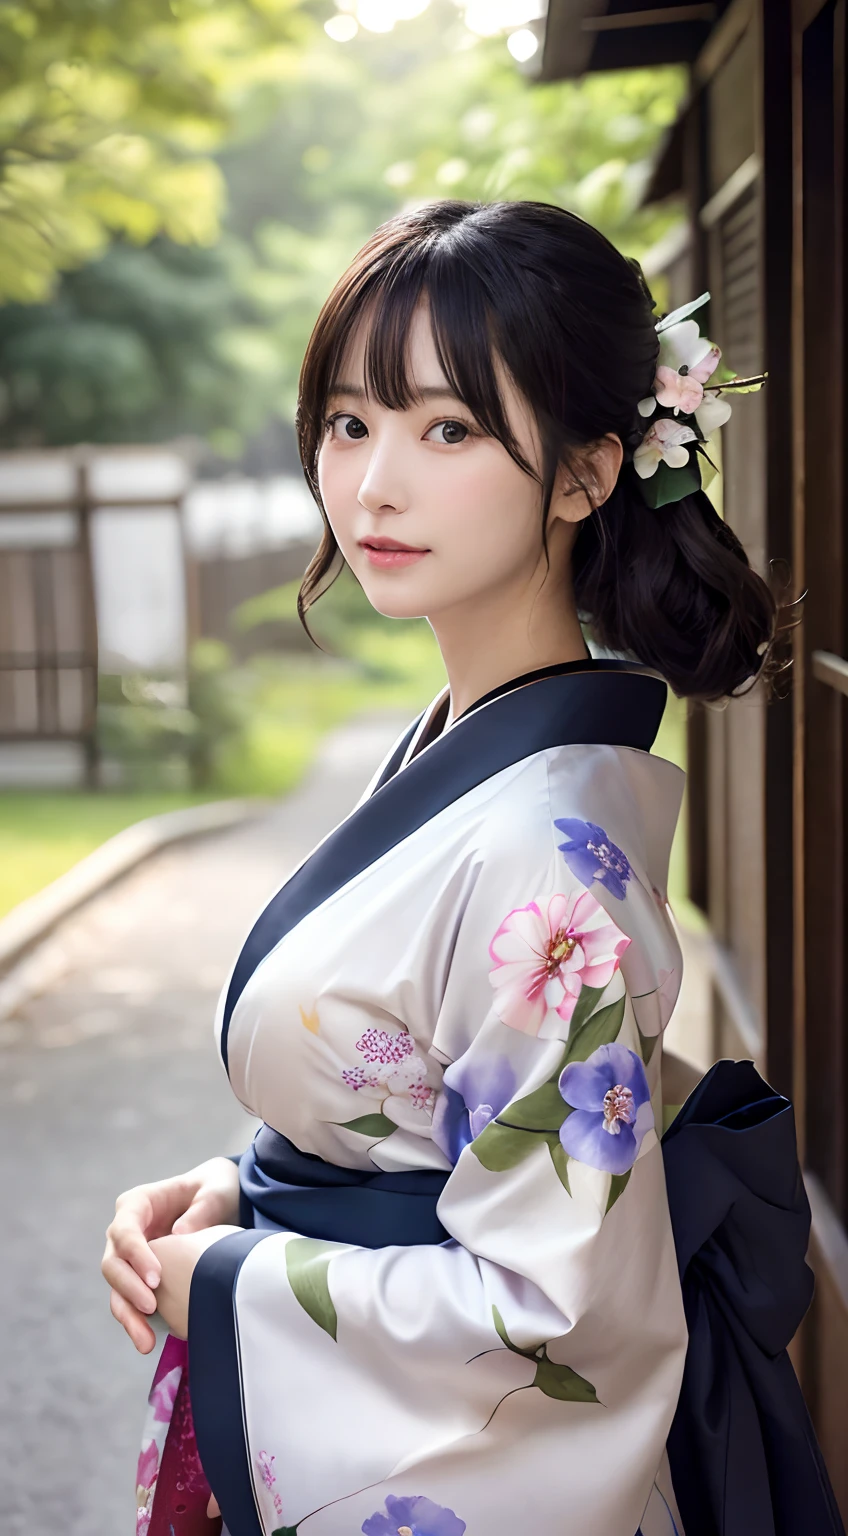 (Kimono)、(top-quality,​masterpiece:1.3,超A high resolution,),(ultra-detailliert,Caustics),(Photorealsitic:1.4,RAW shooting,)Ultra-realistic capture,A highly detailed,high-definition16Kfor human skin、Colossal 、 Skin texture is natural、、The skin looks healthy with an even tone、 Use natural light and color,One Woman,japanes,,kawaii,A dark-haired,Middle hair,(depth of fields、chromatic abberation、、Wide range of lighting、Natural Shading、)、(Exterior light at night:1.4)、(Morning glory petals on kimono pattern:1.2)、(Hair swaying in the wind:1)、(The tree々reflecting light:1.3)、(summer festival in background)、(kawaii)